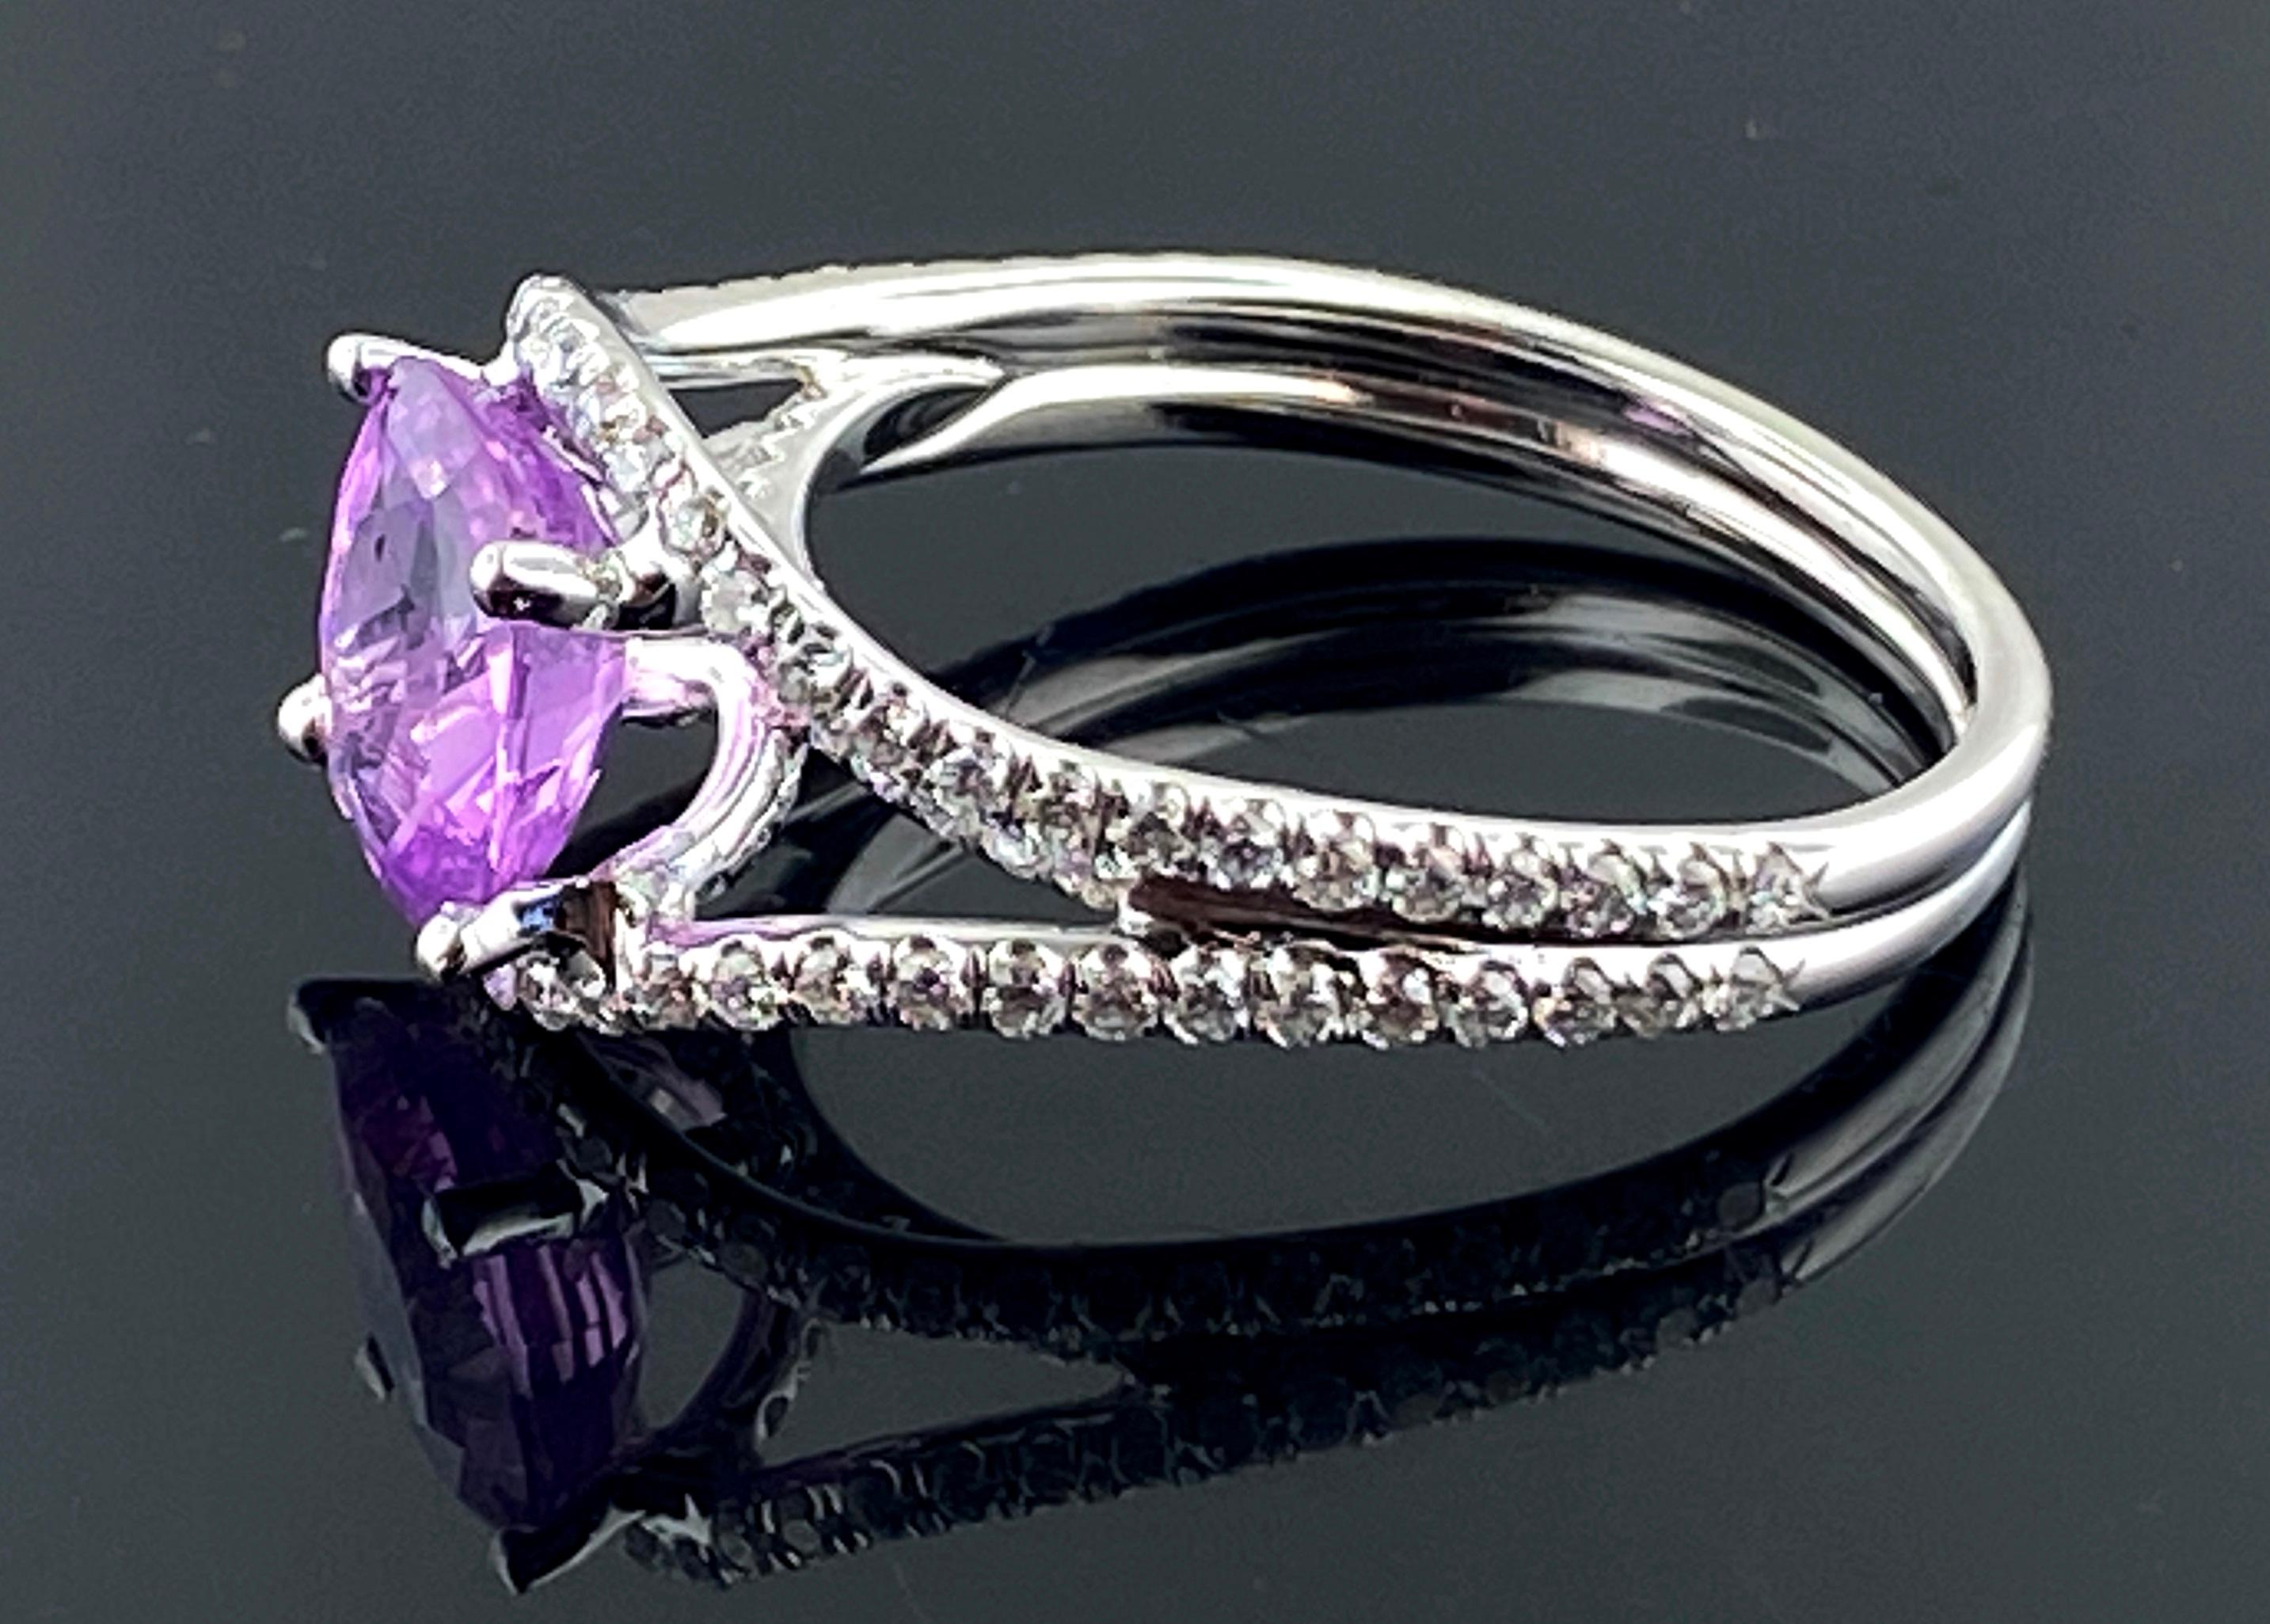 Women's or Men's 18 KT White Gold 2.37 Carat Oval Cut Pink Sapphire and Diamond Ring